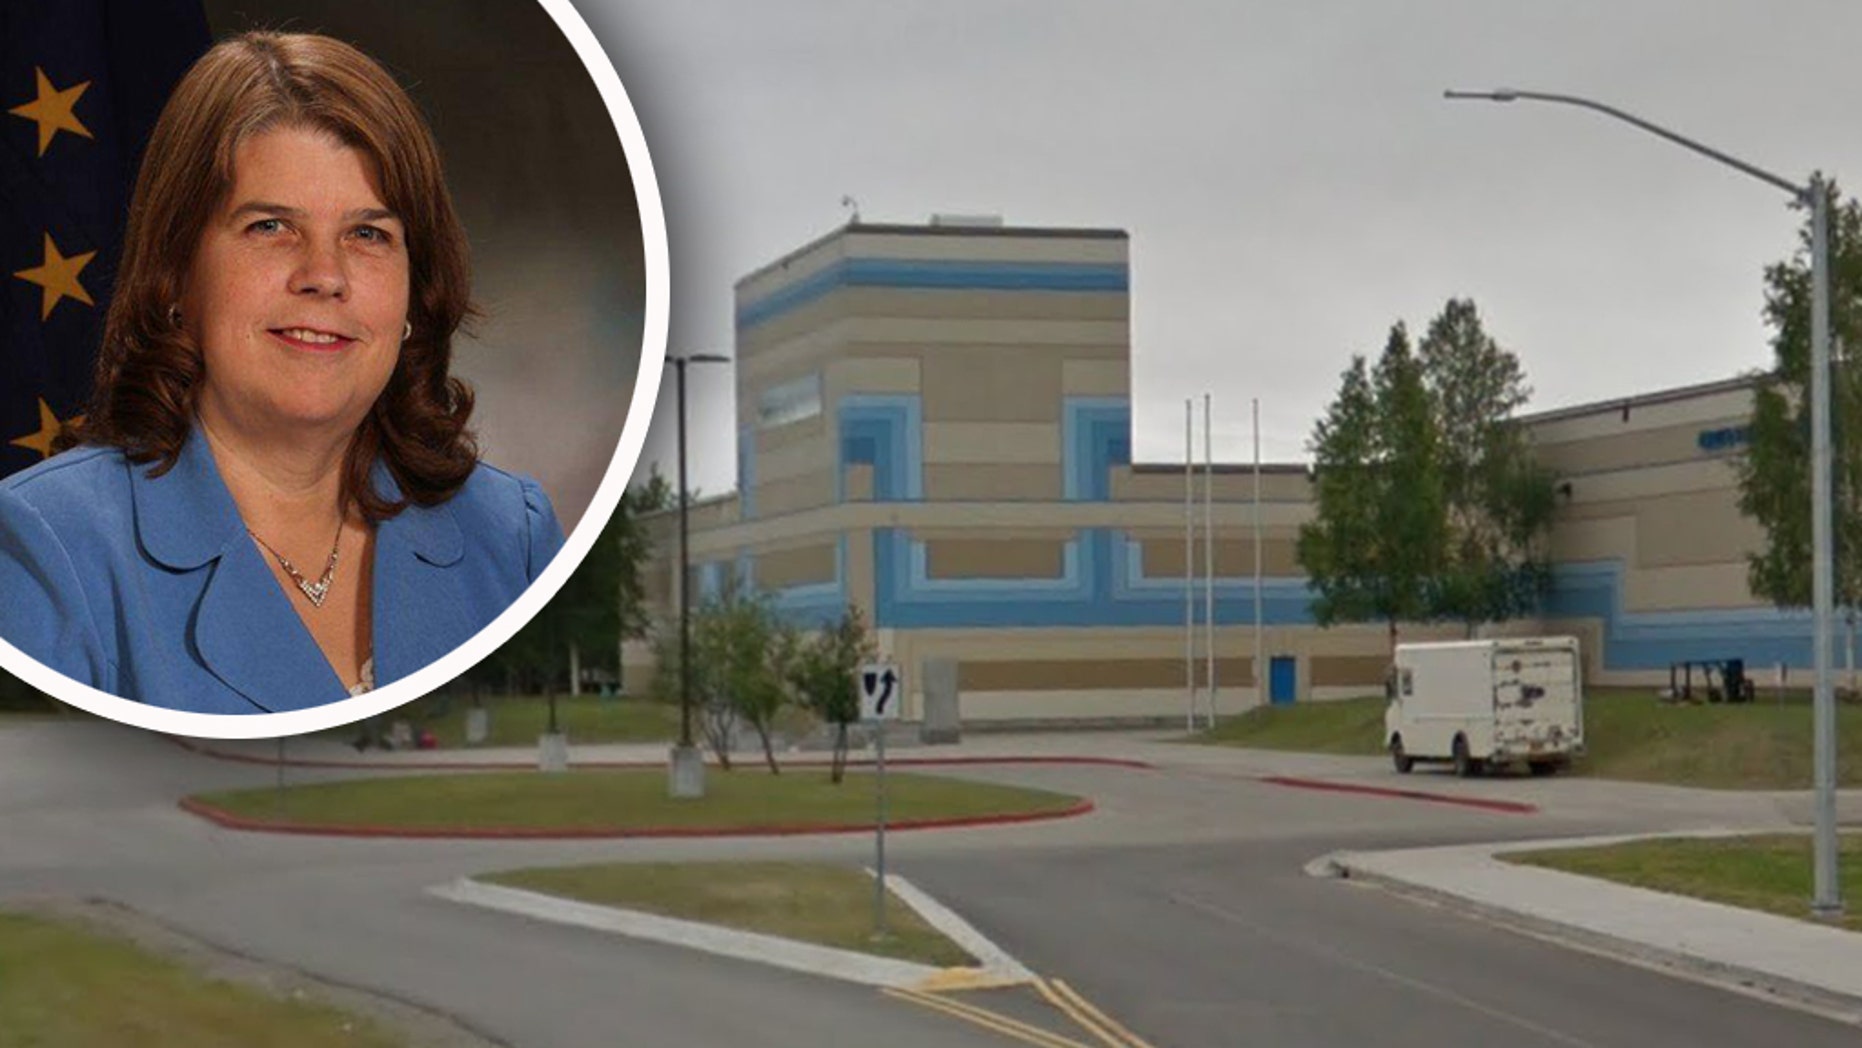 Republican Rep. Tammie Wilson criticizes a school district in Alaska after claiming that a student had been wrongly suspended after being defended against a group of boys who had her trapped in a bathroom. (Google Maps / Tammie Wilson)